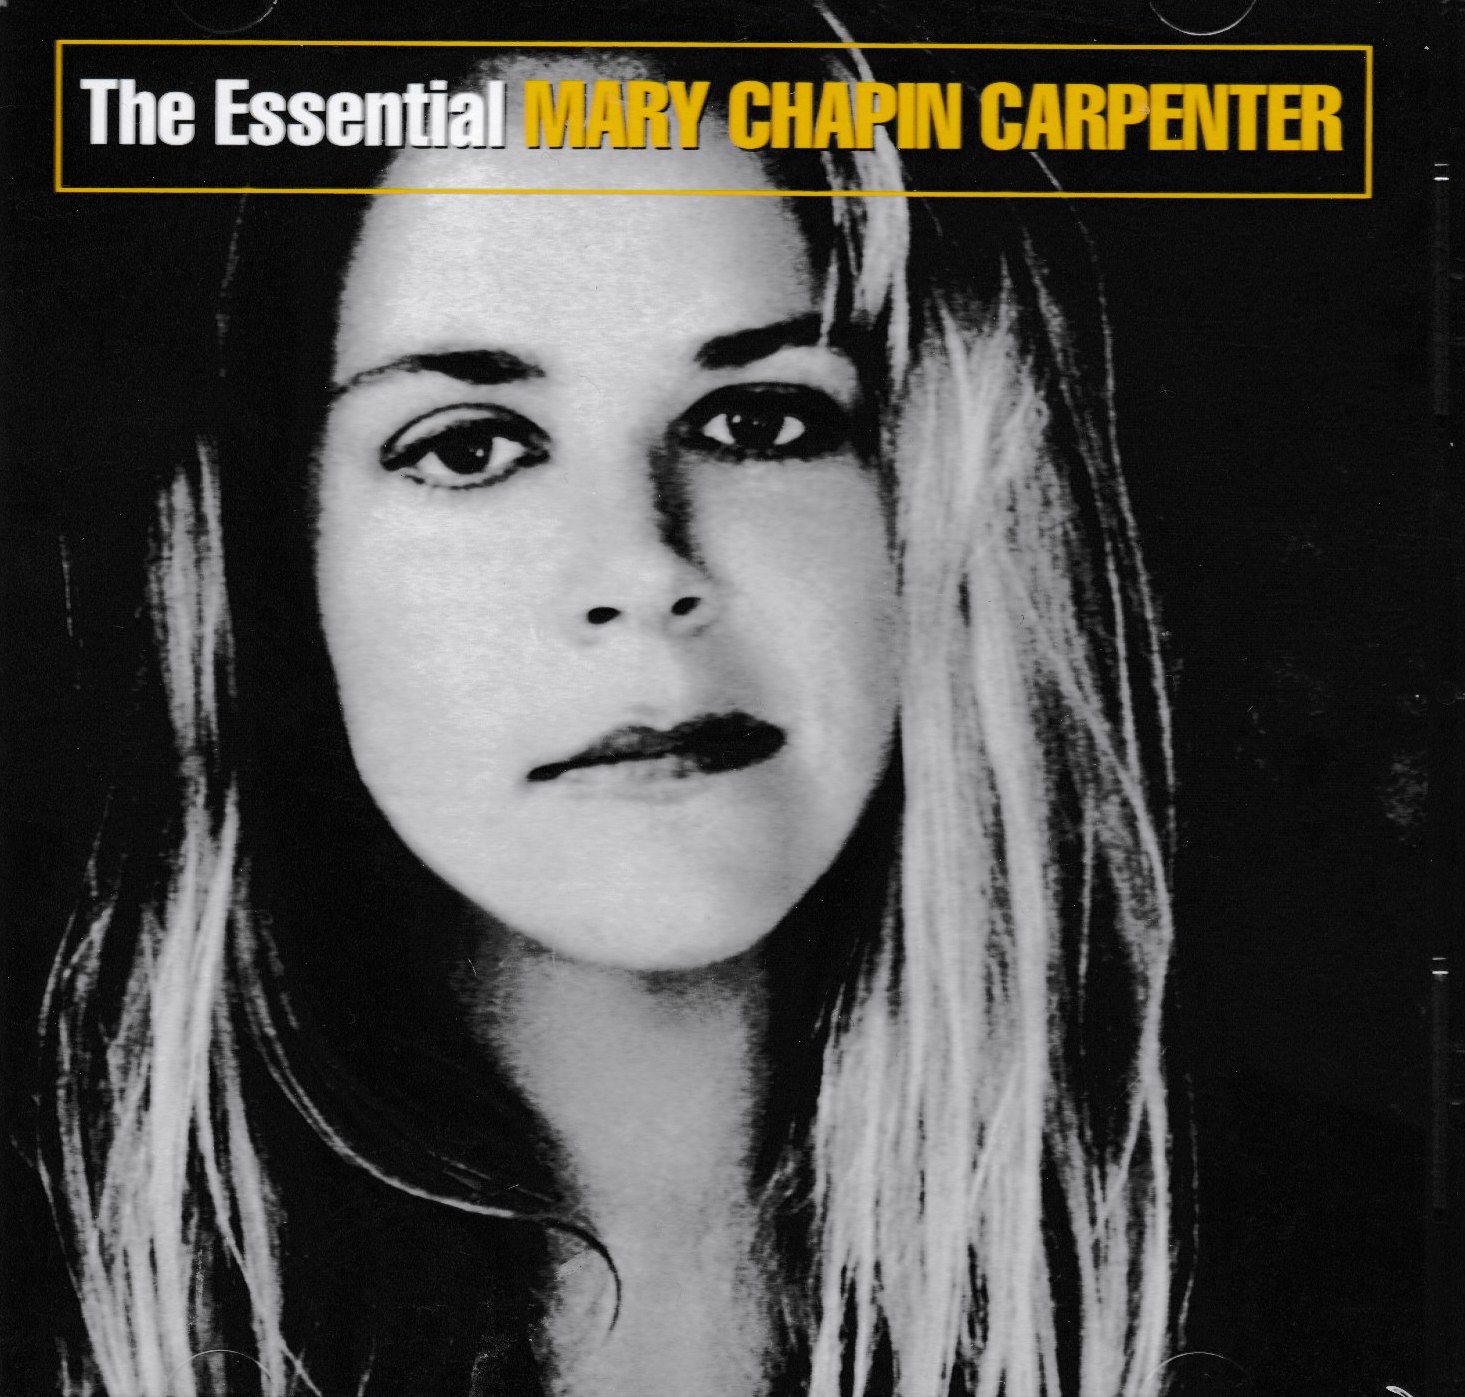 MARY CHAPIN CARPENTER - The Essential Mary Chapin Carpenter CD 2003. 